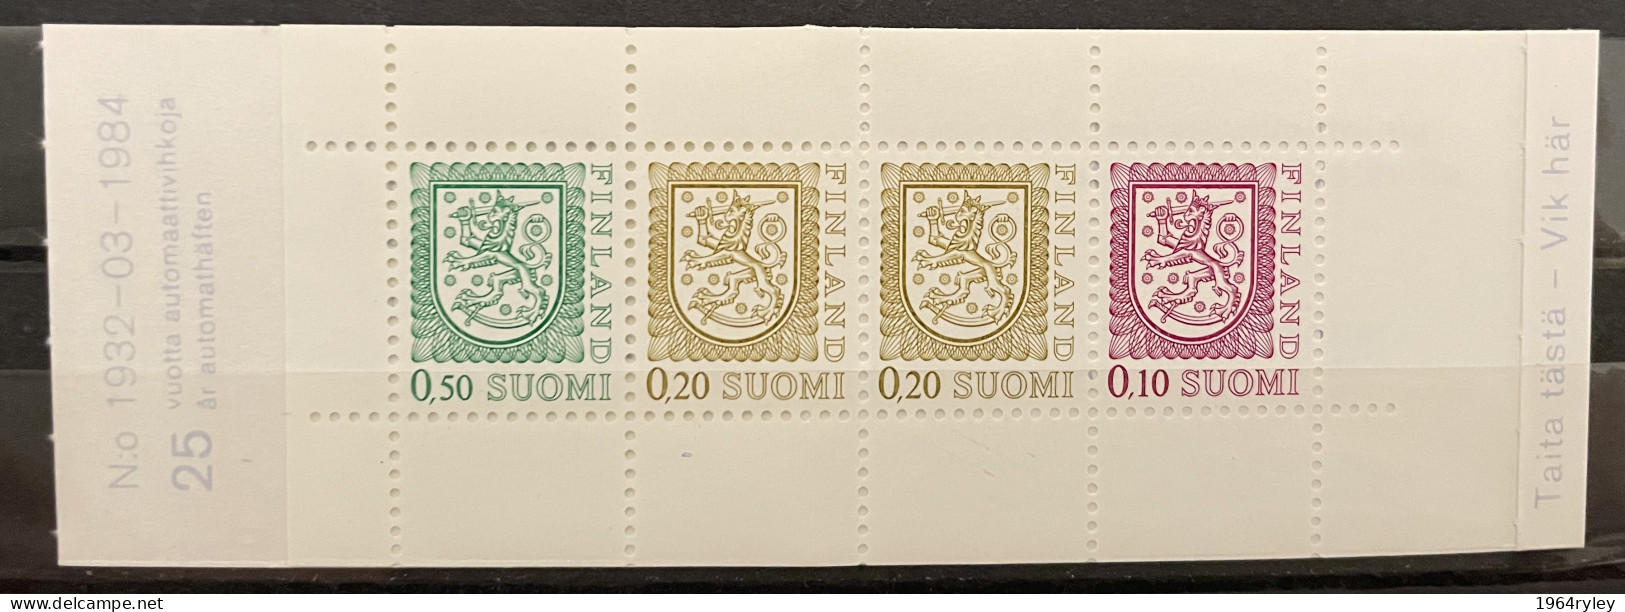 FINLAND  - MNH** - 1984 - # BOOKLET # MH 14 - Carnets